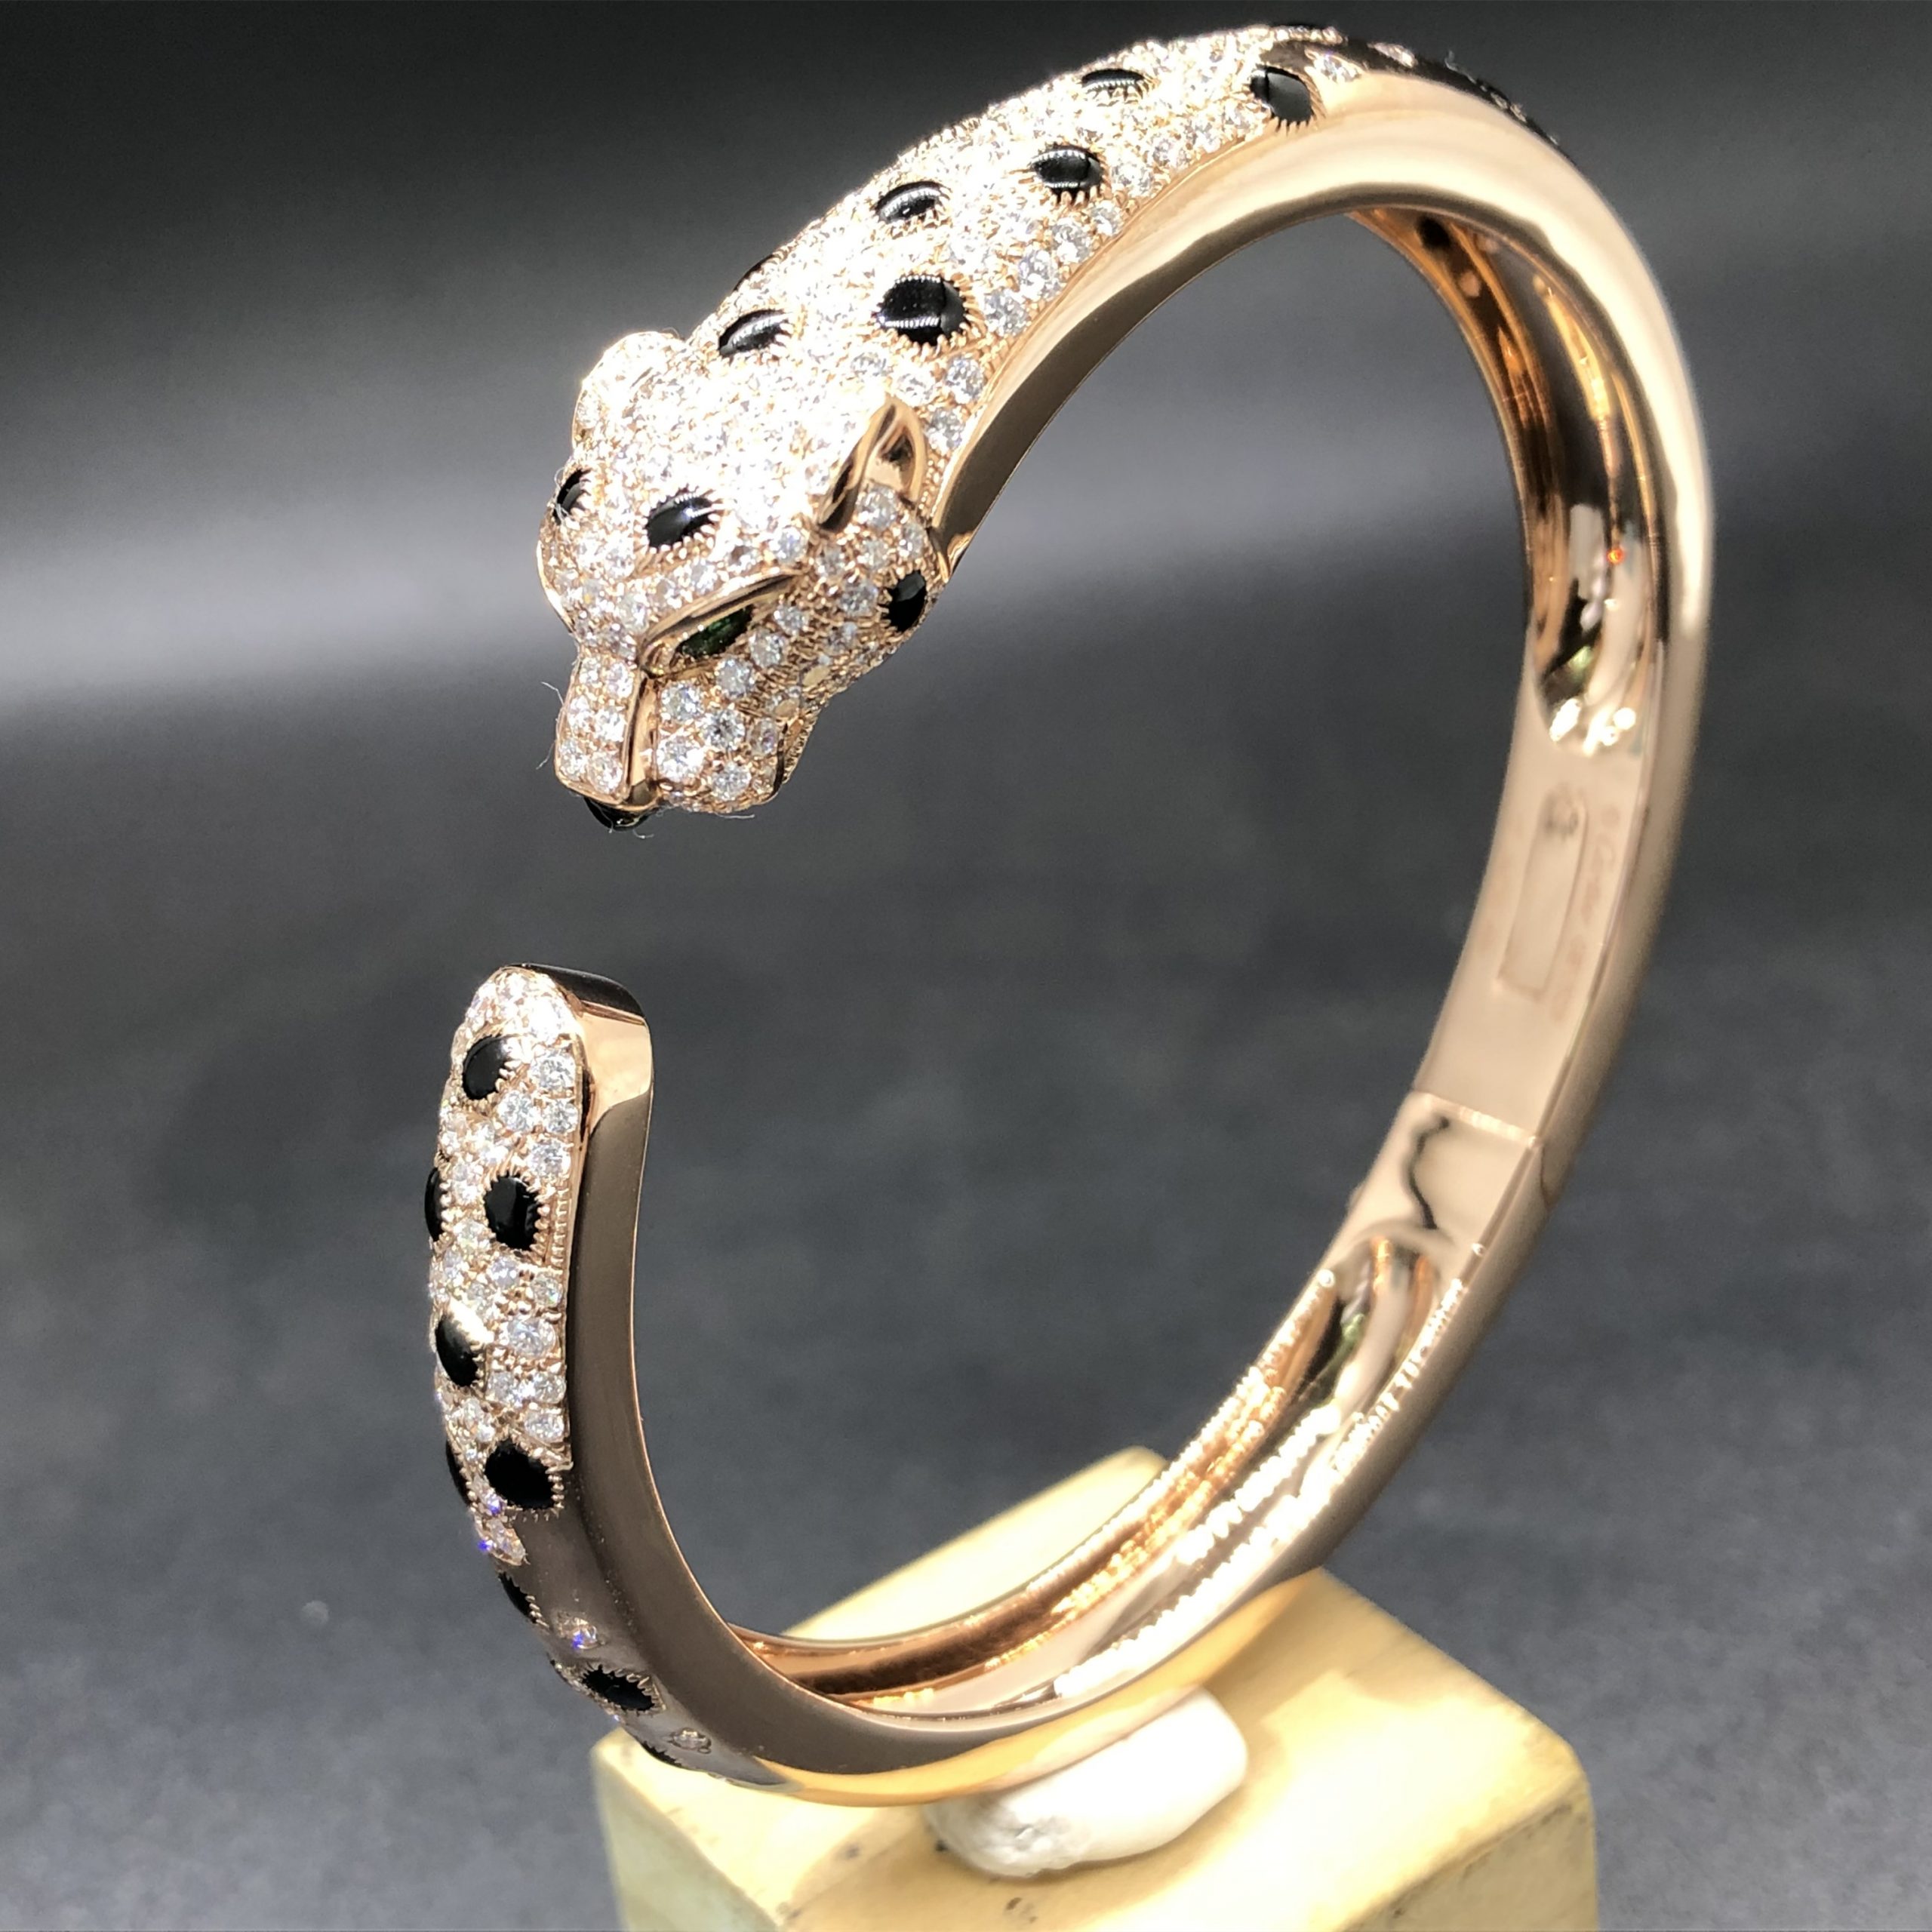 Custom-made Panthere De Cartier Bracelet in 18K Rose Gold  with Onyx,Emerald and Paved Diamonds